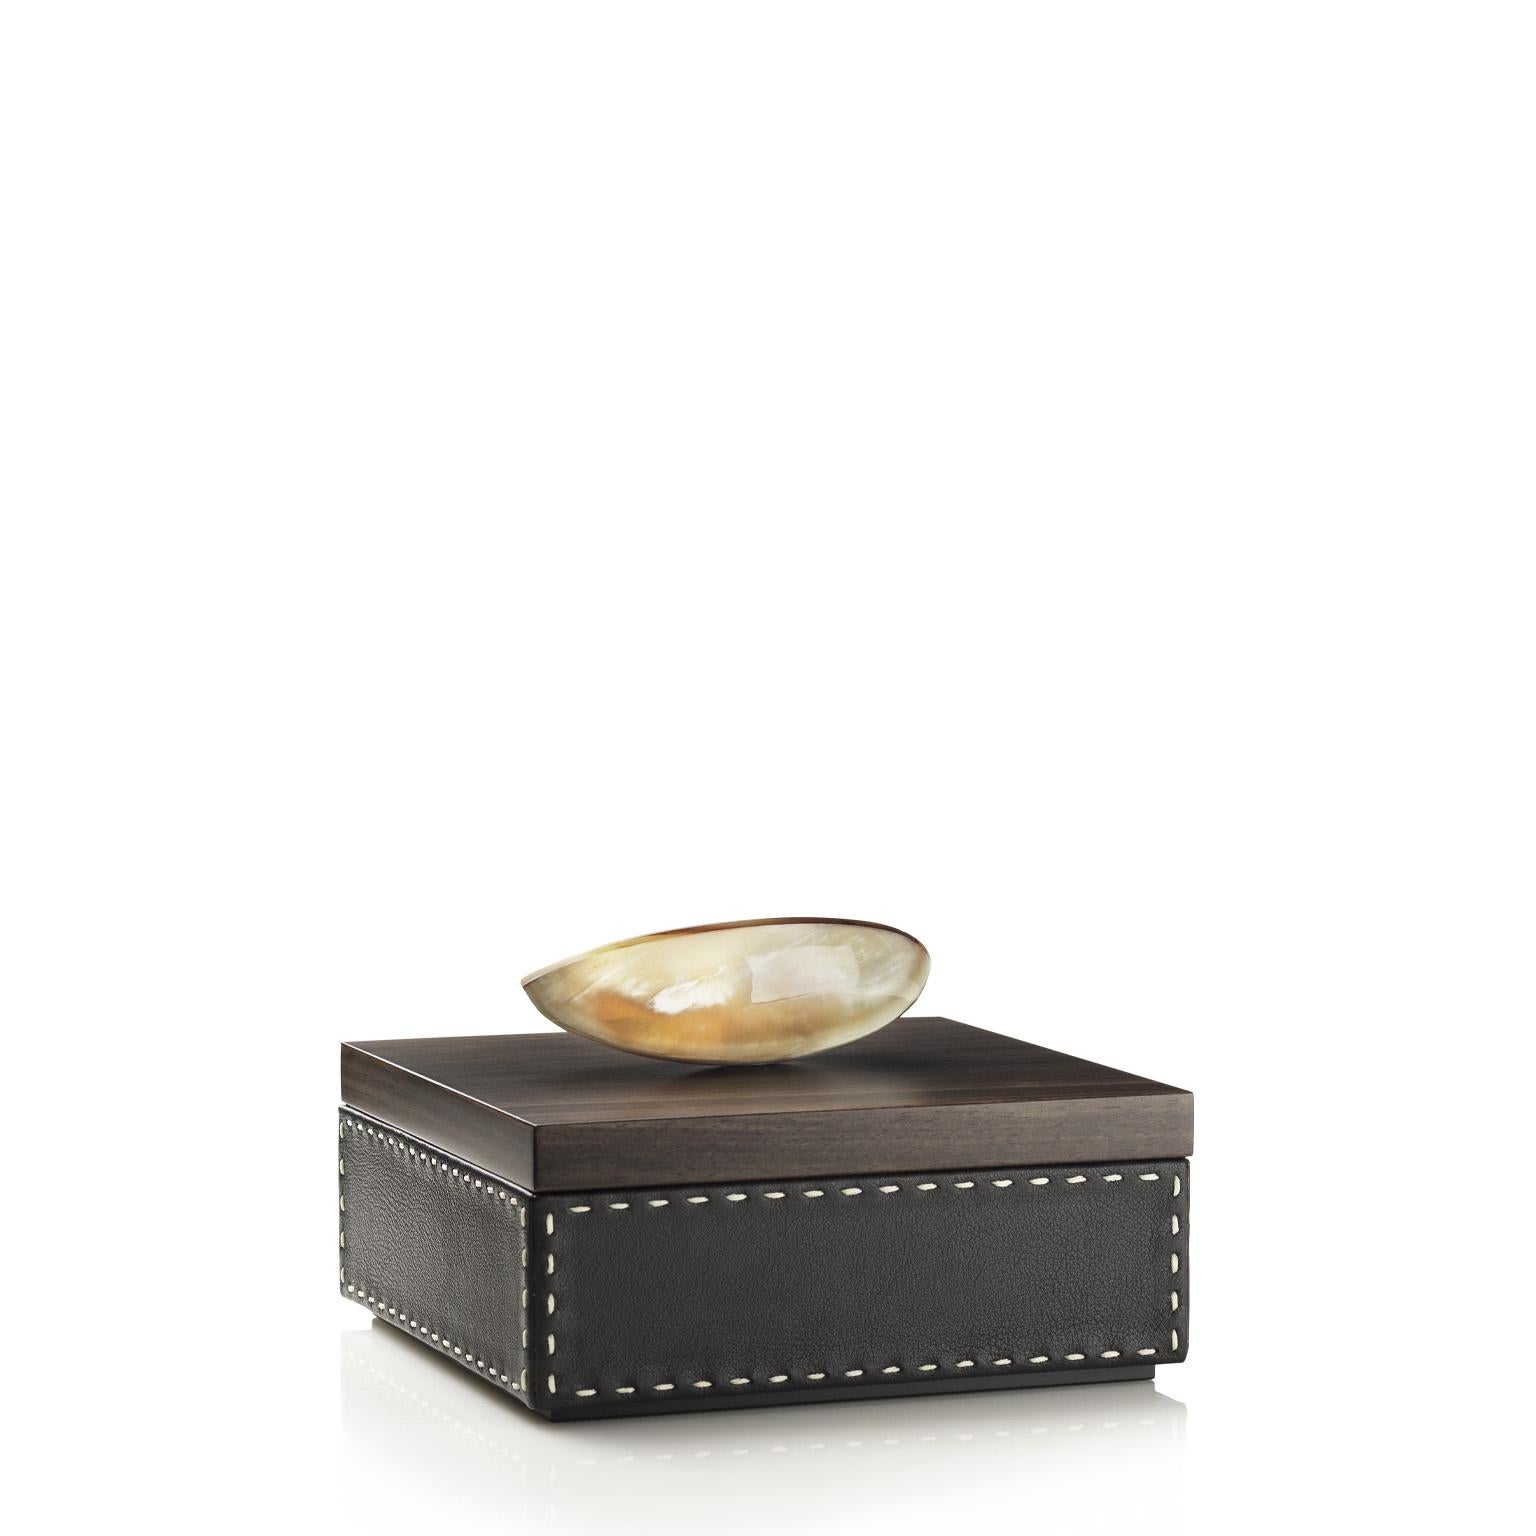 With its refined appearance, our Capricia square box can easily fit both traditional and contemporary décor. Its clean traditional shape is enriched by a lining in Onyx color pebbled leather with handmade cream-colored stitching. The interior is